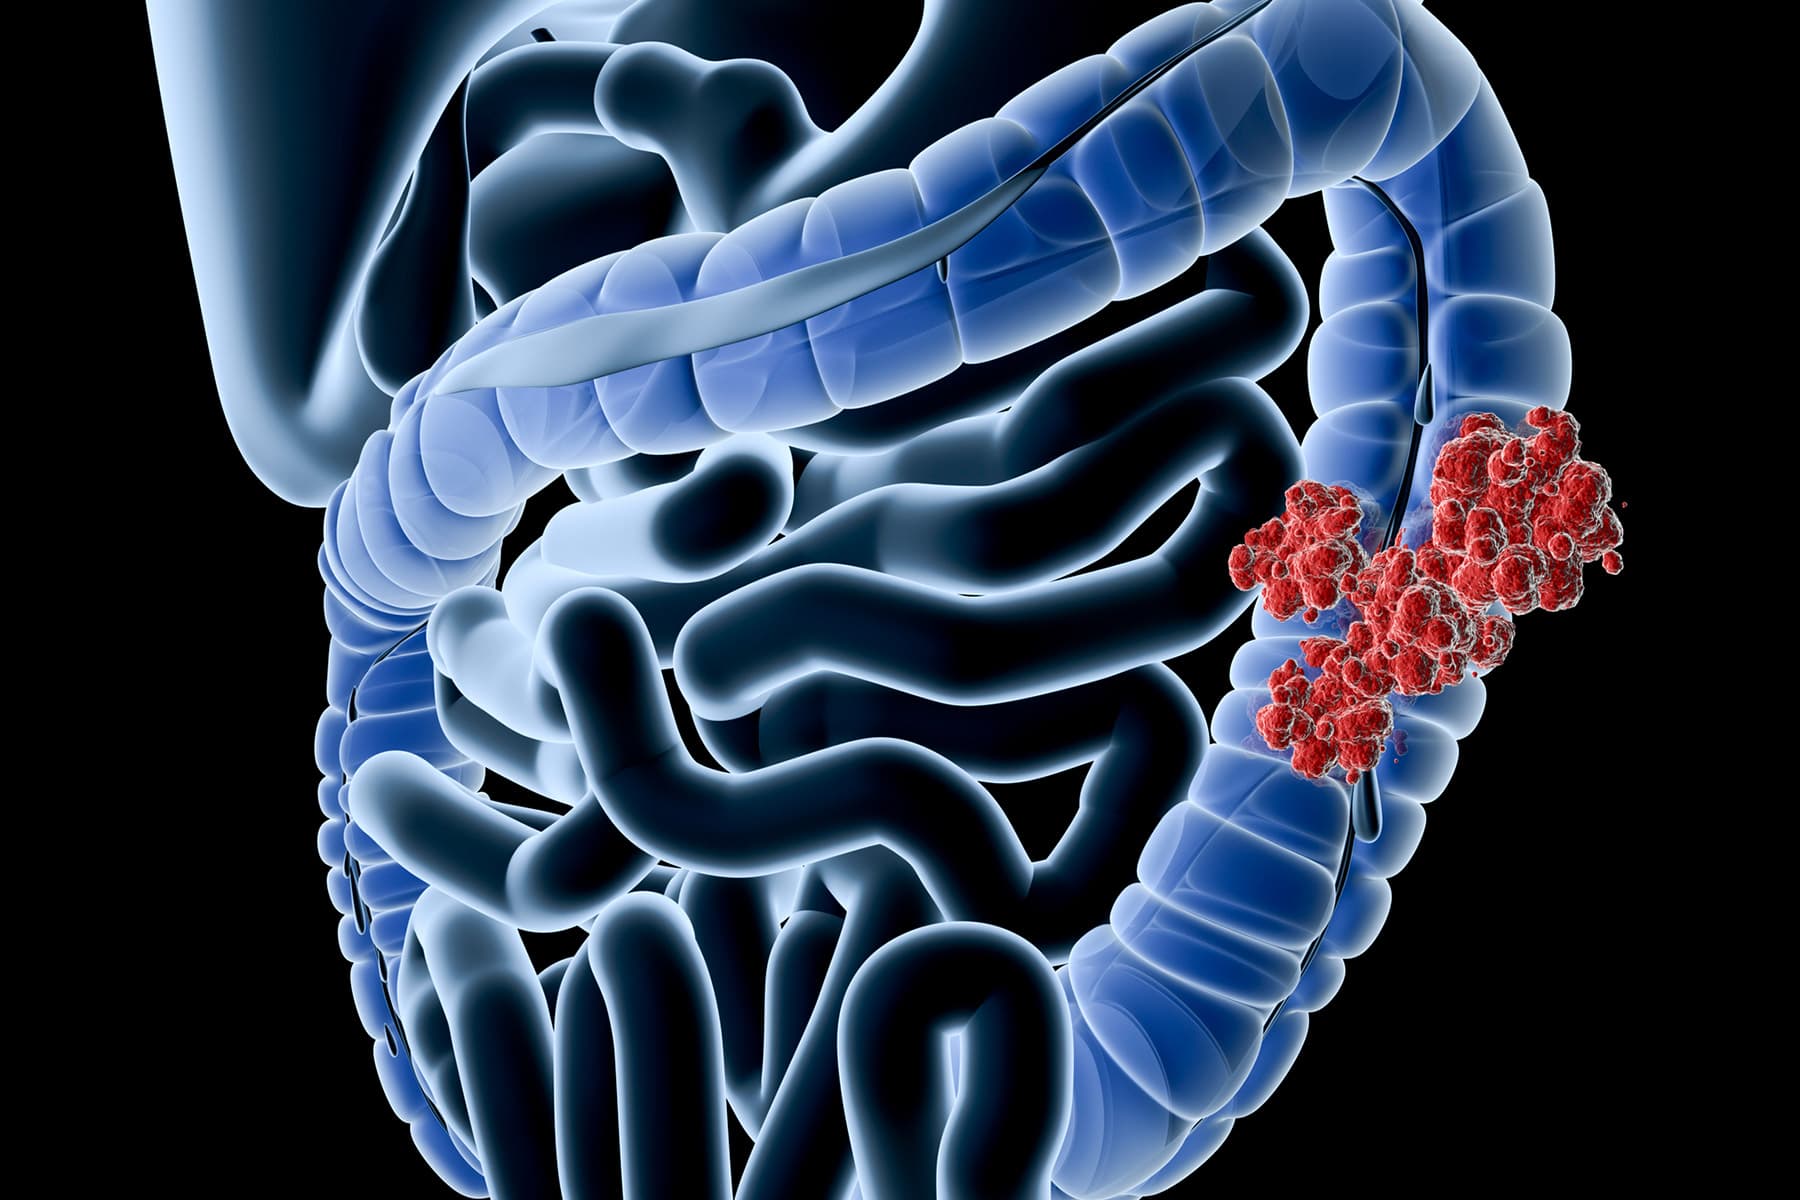 Colon Cancer, Typically Avoidable, Hits Black Males, the Young More